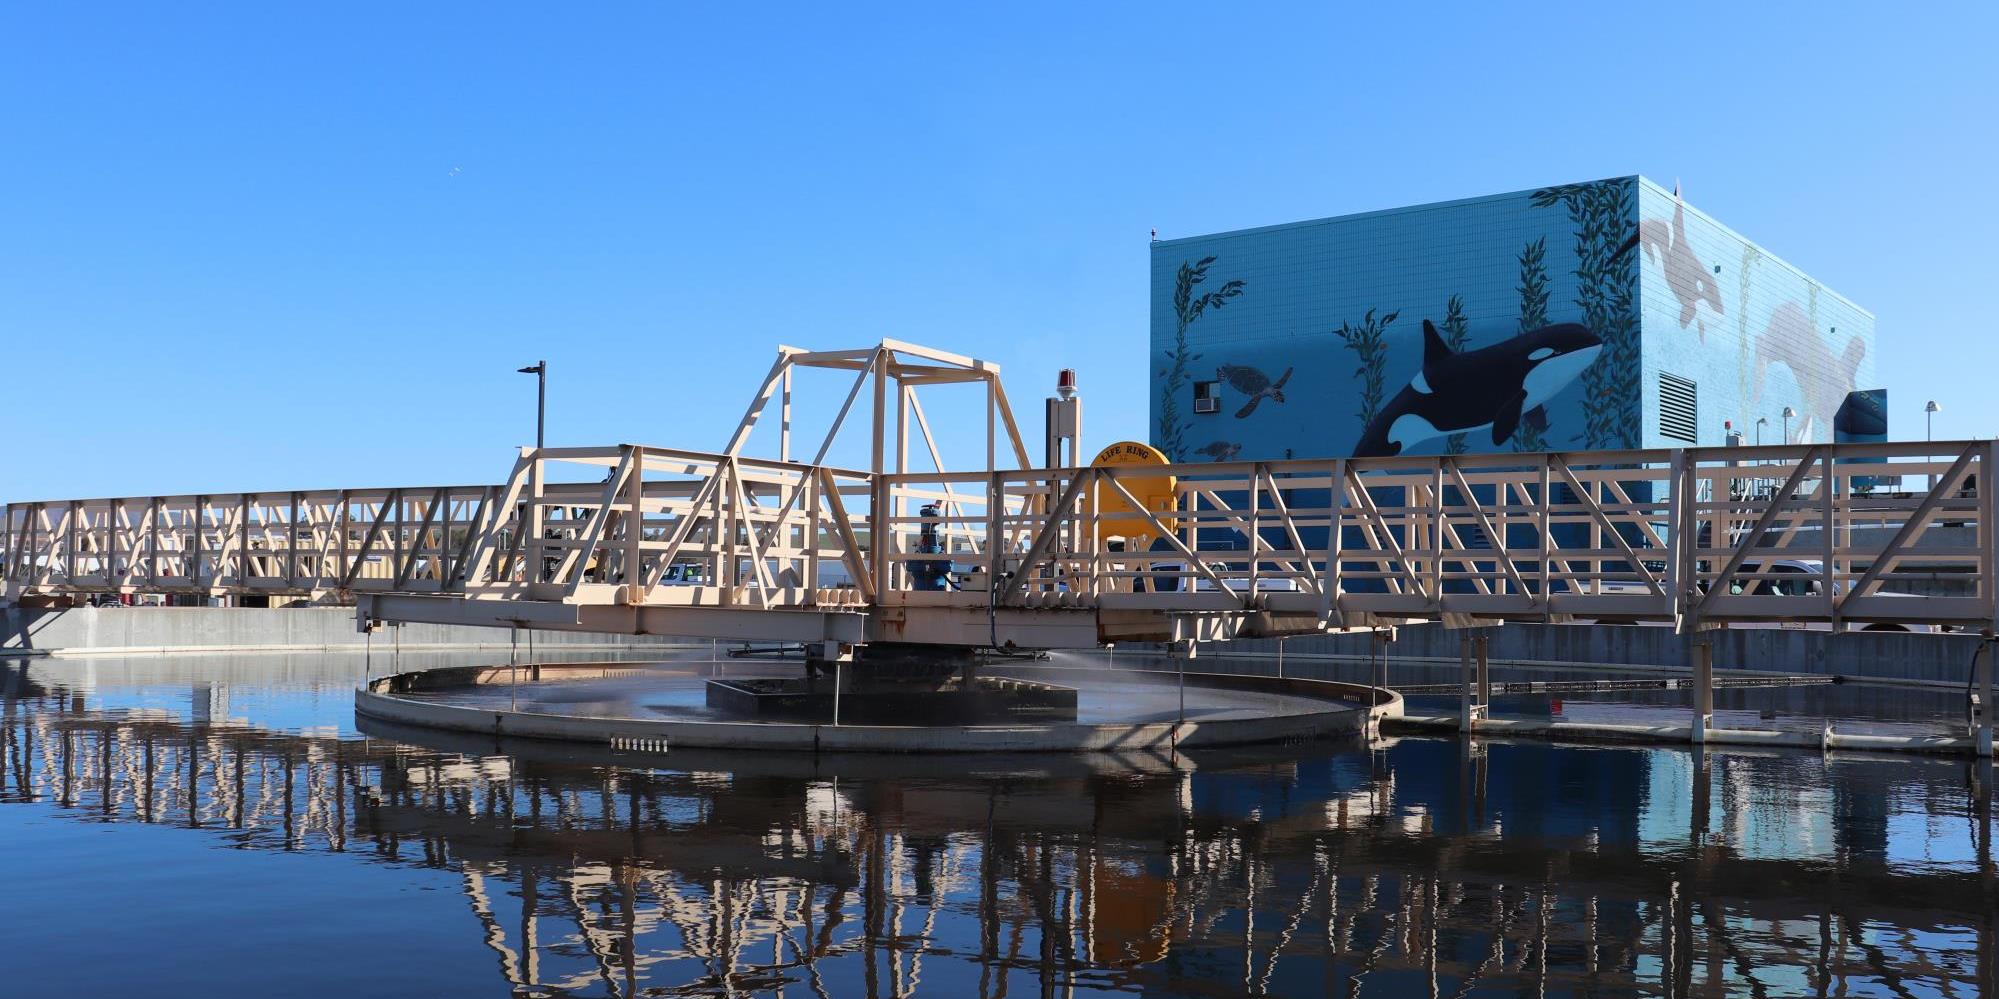 Clarifier and Killer Whale Mural at the Livermore Water Reclamation Plant